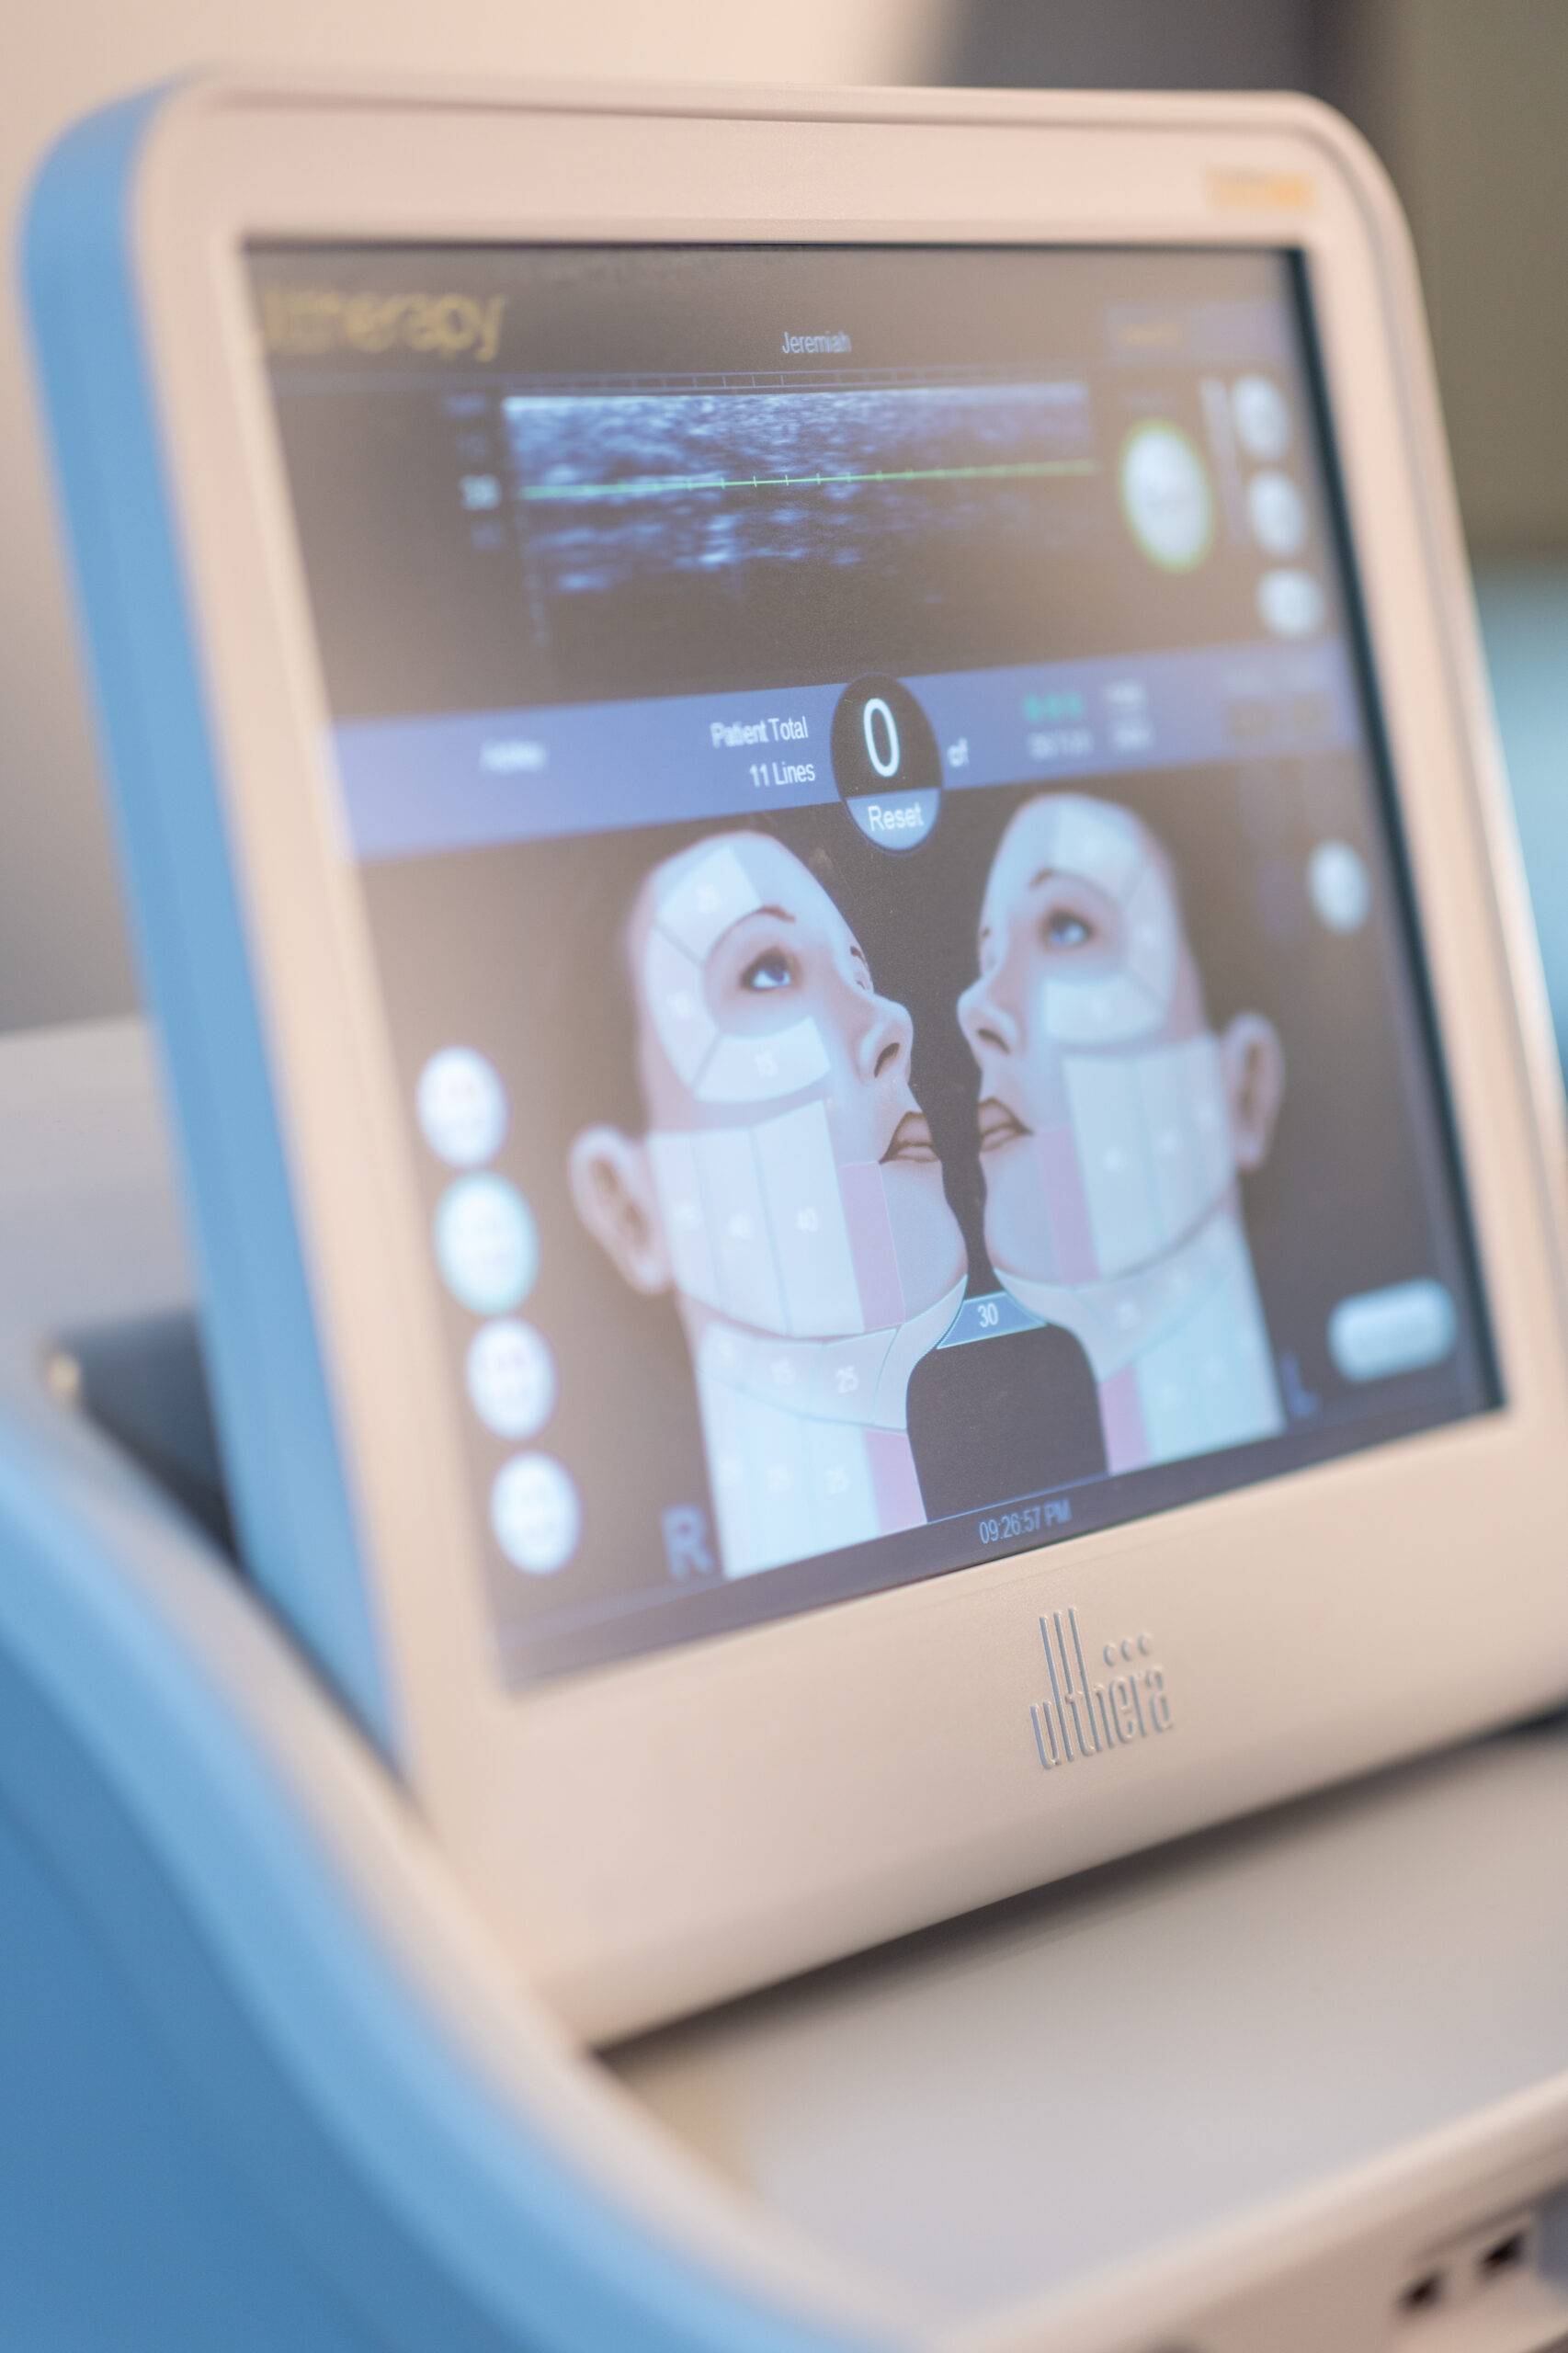 Close-up of a medical device screen displaying a graphic interface for Ultherapy skin tightening treatment, with illustrated faces and adjustment settings.